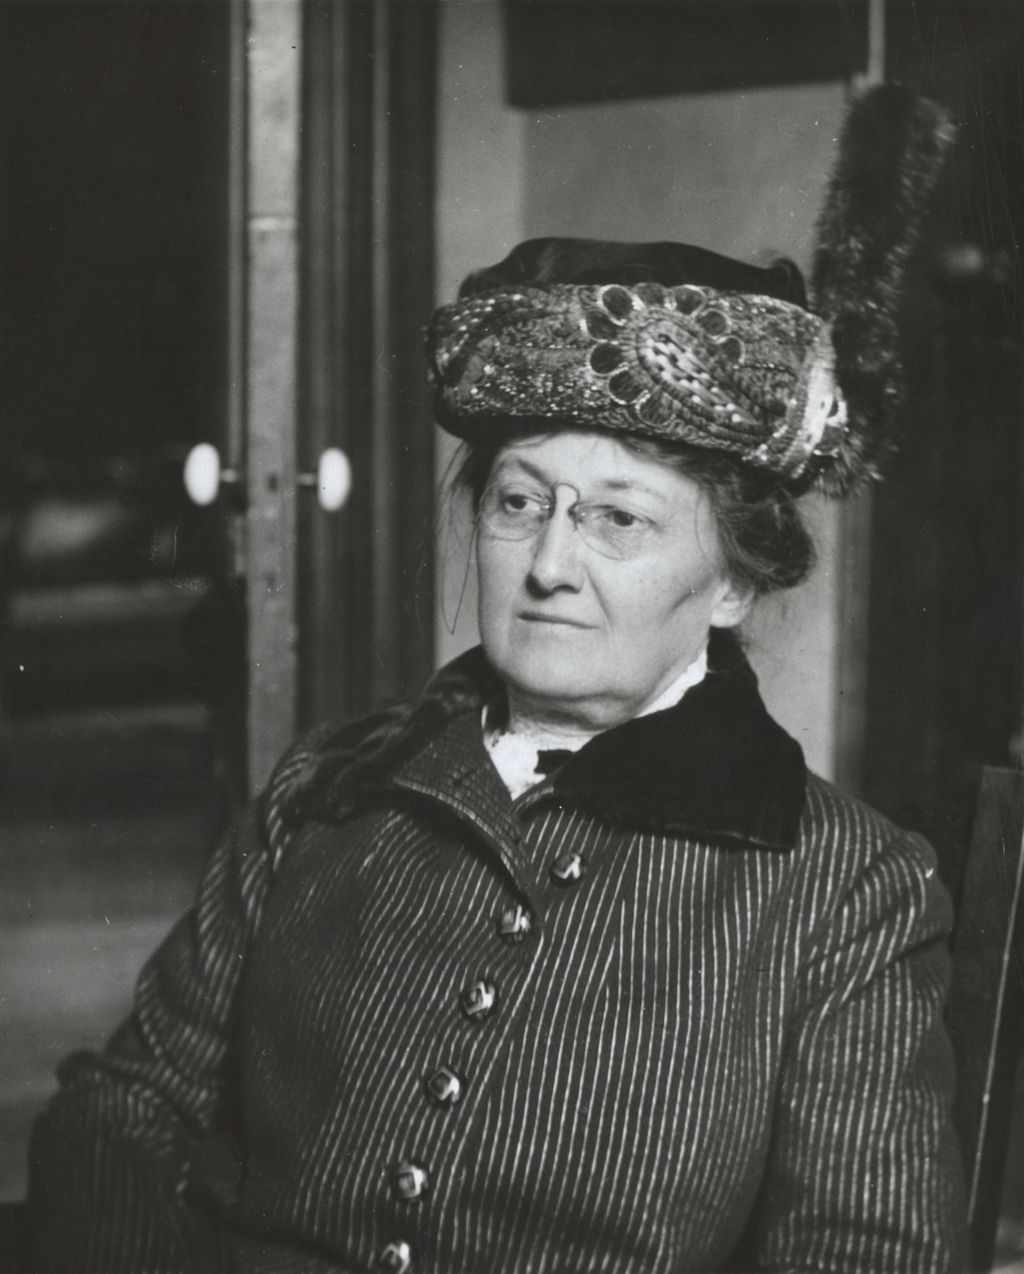 Hull-House Art School founder and director Enella Benedict in embroidered hat